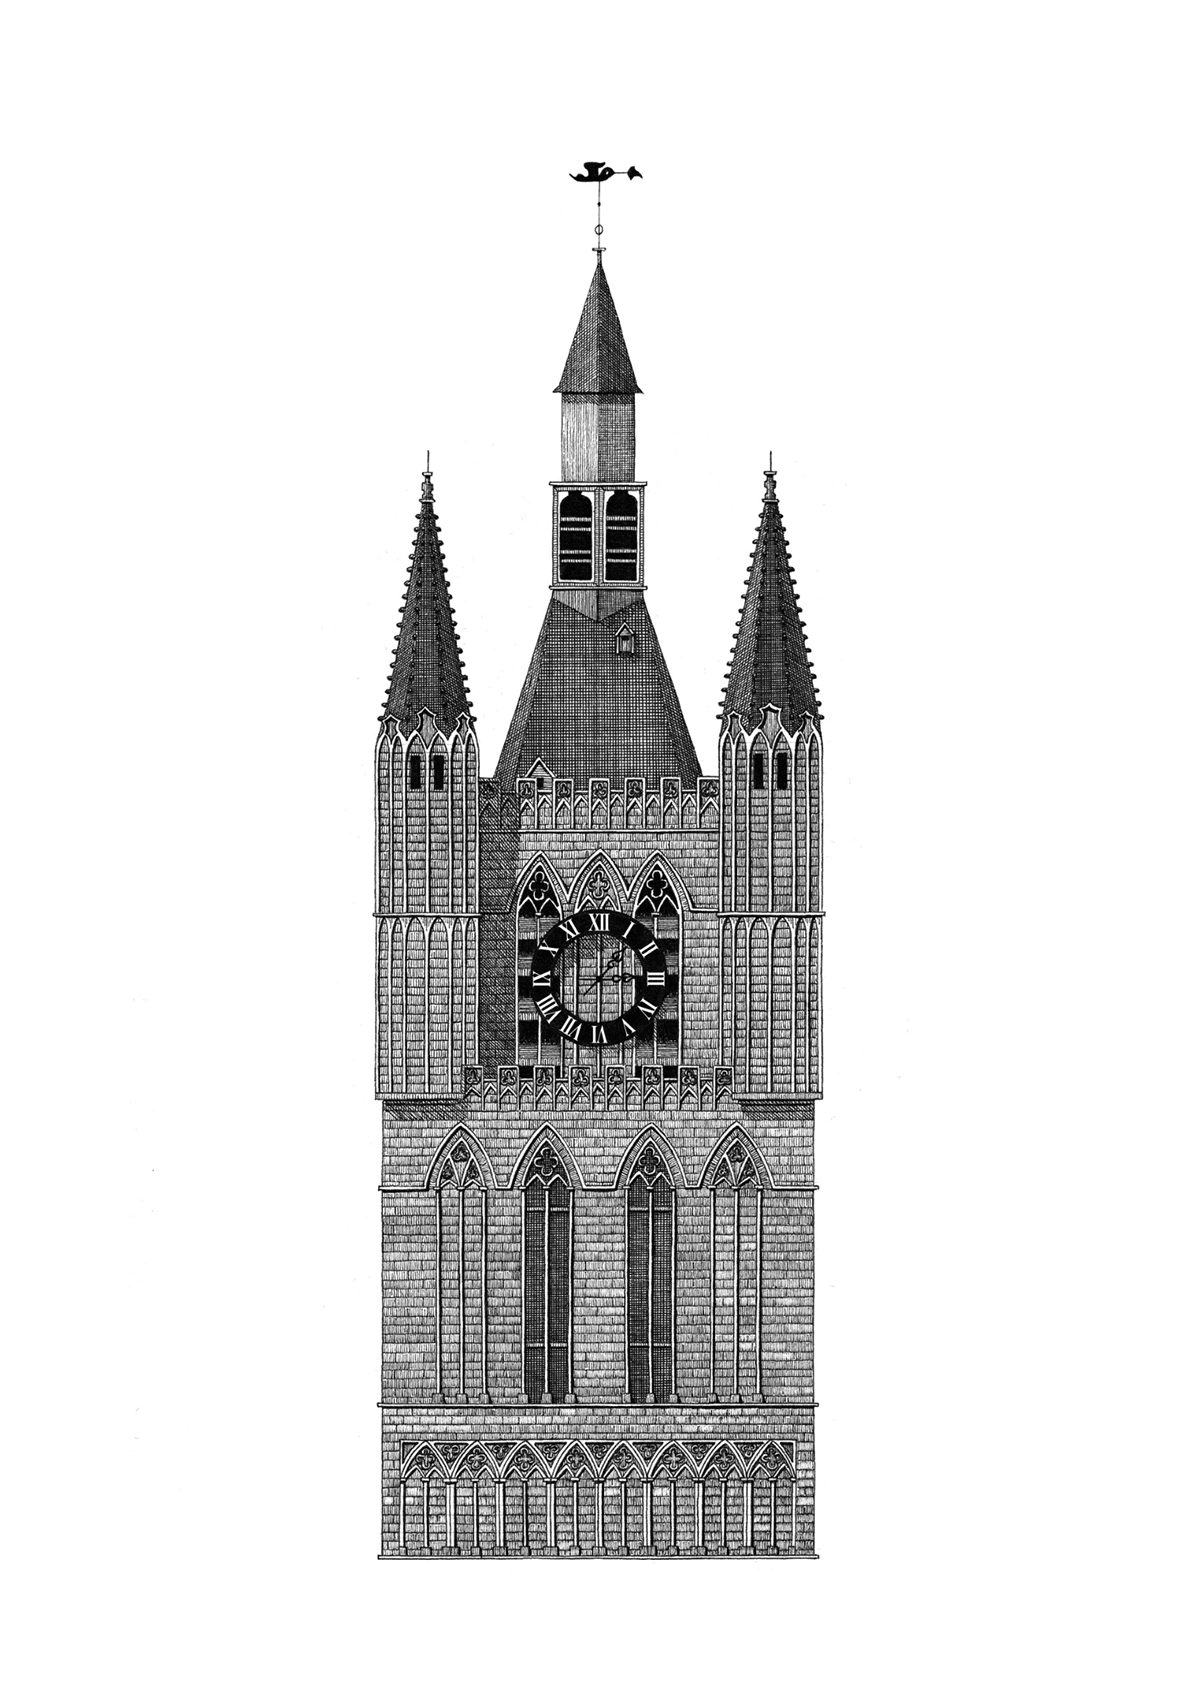 Pen and ink illustration of the Cloth Hall in Ypres